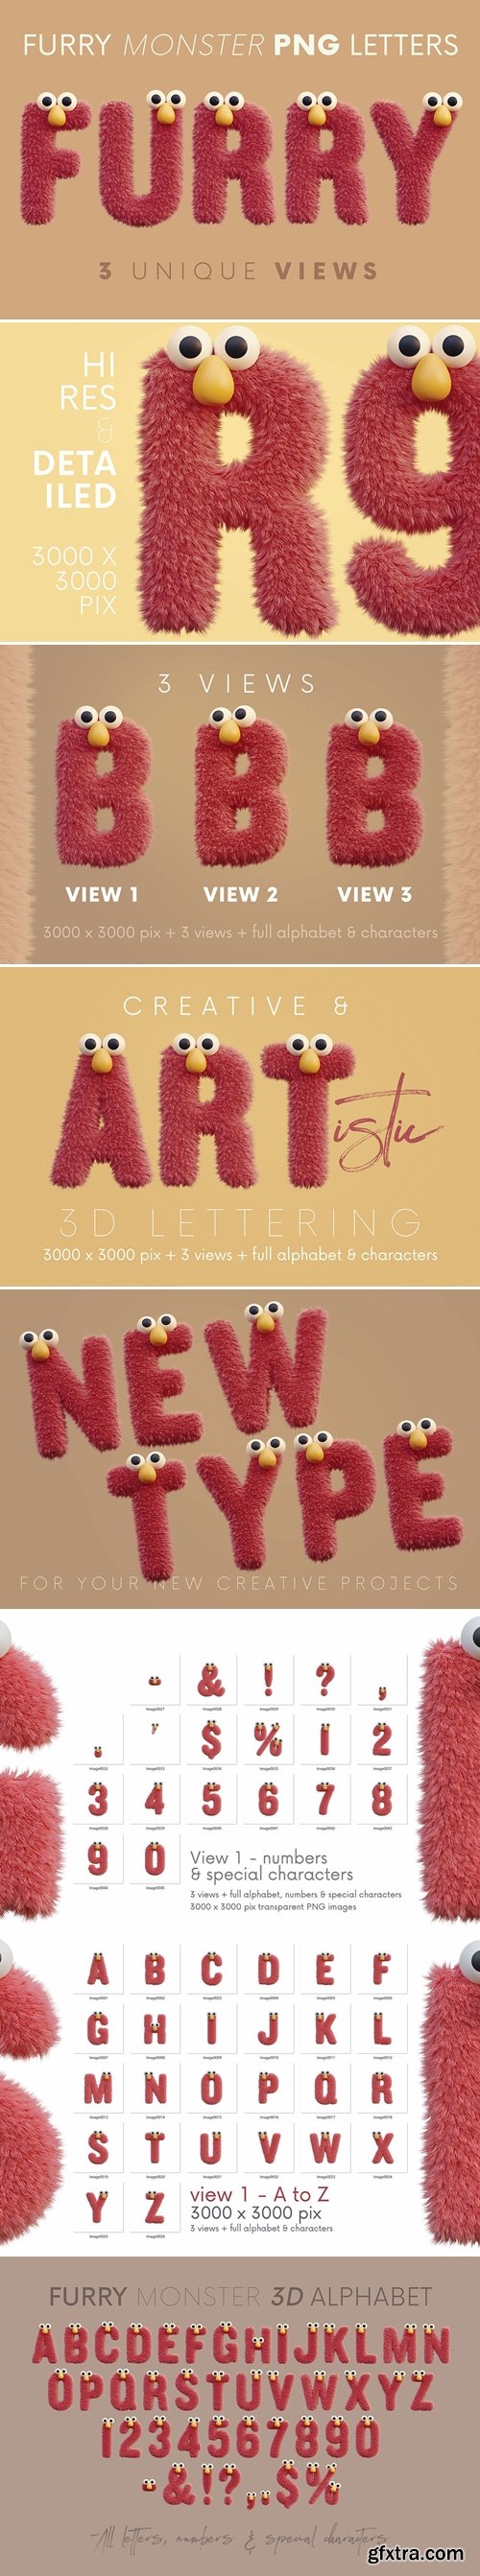 Furry Monsters - 3D Lettering